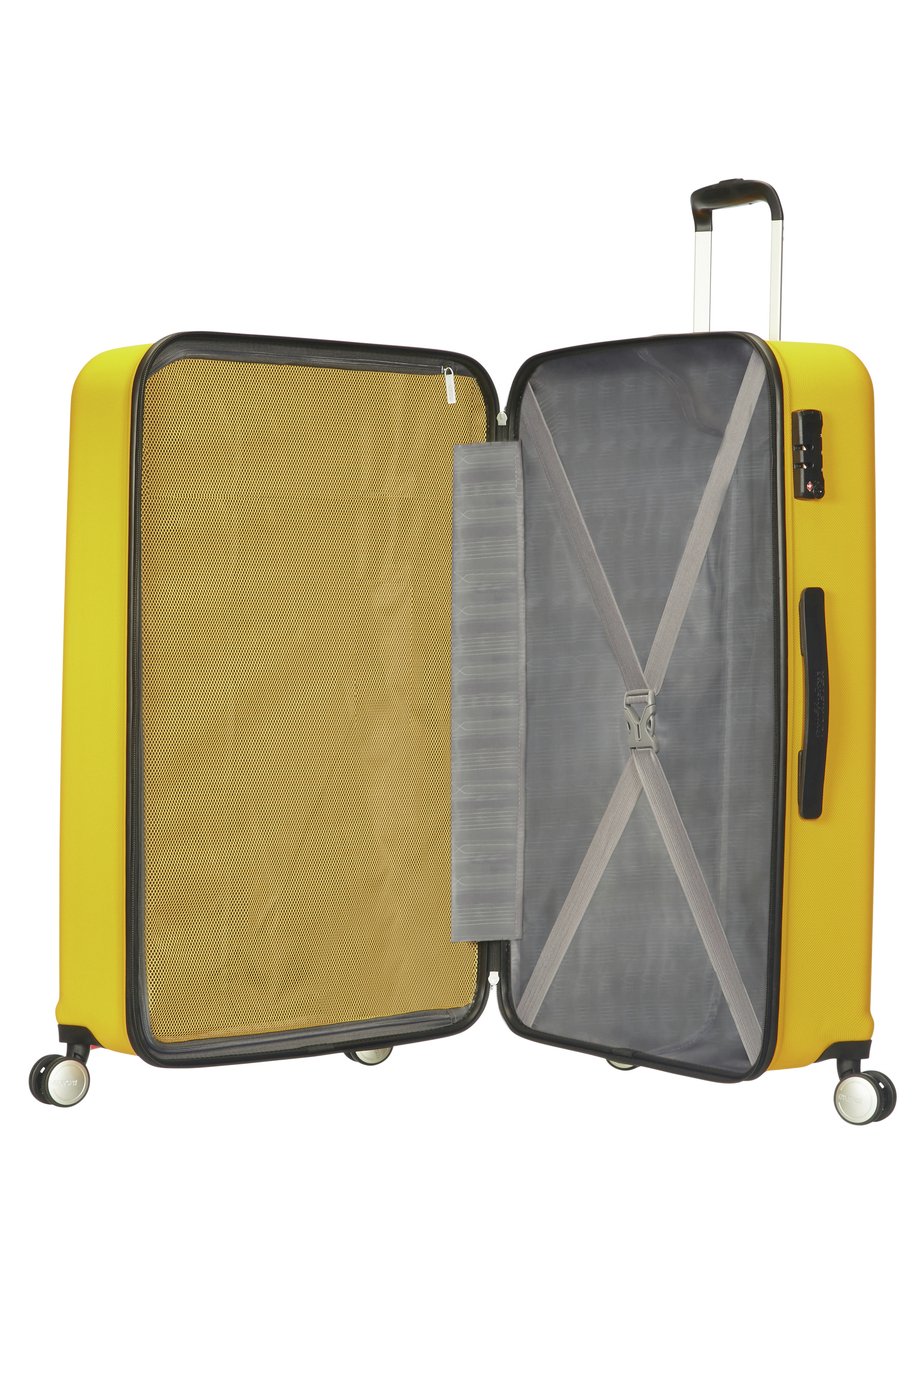 American Tourister Hypercube Large Yellow Suitcase Review